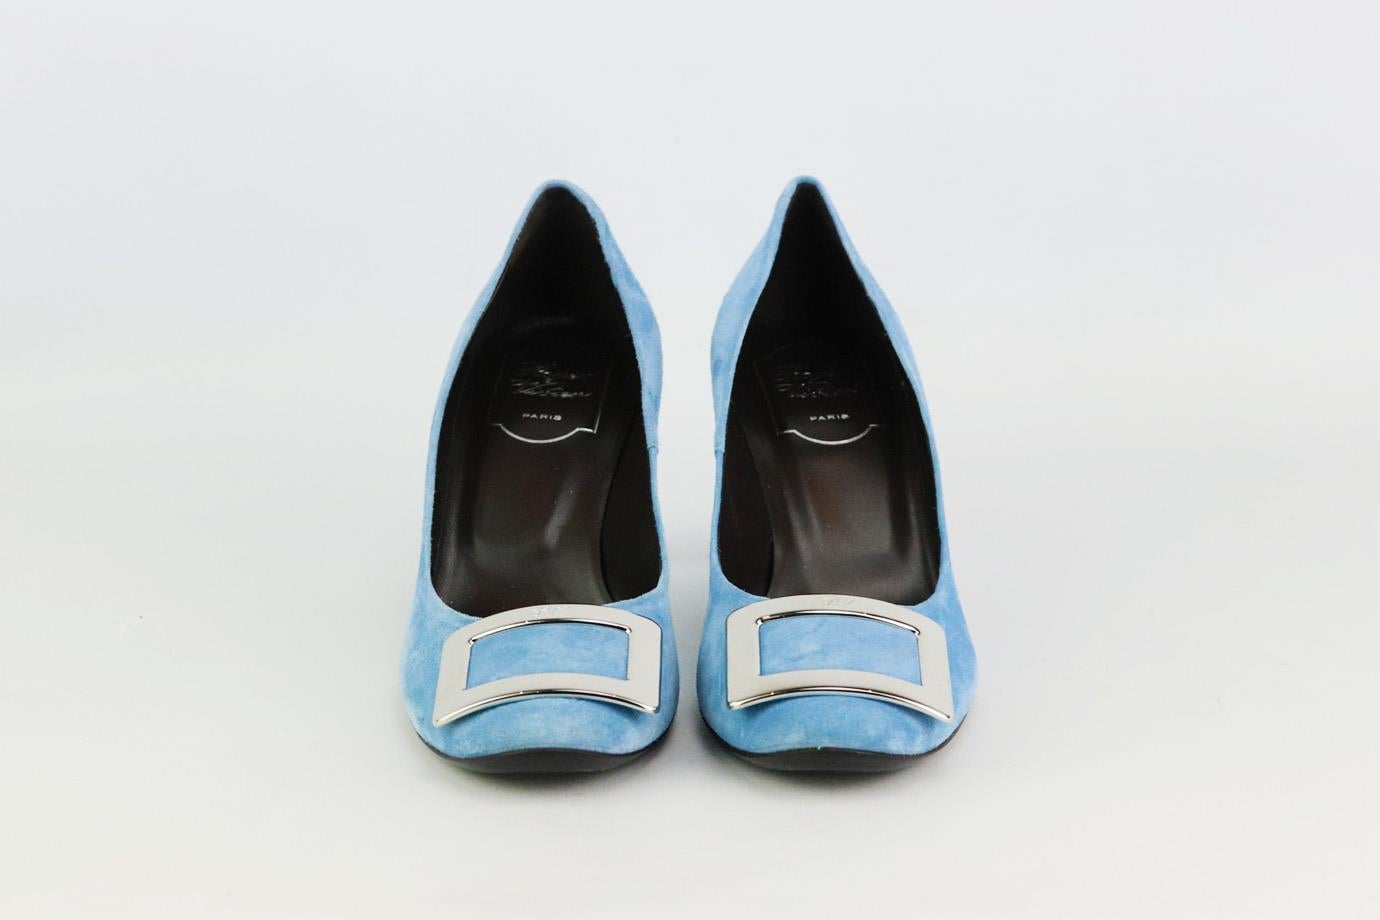 These pumps by Roger Vivier are an elegant re-creation of the founder's original 1965 design, they're made from light-blue suede and embellished with a silver-tone signature buckle that tops the rounded toe. Heel measures approximately 50 mm/ 2